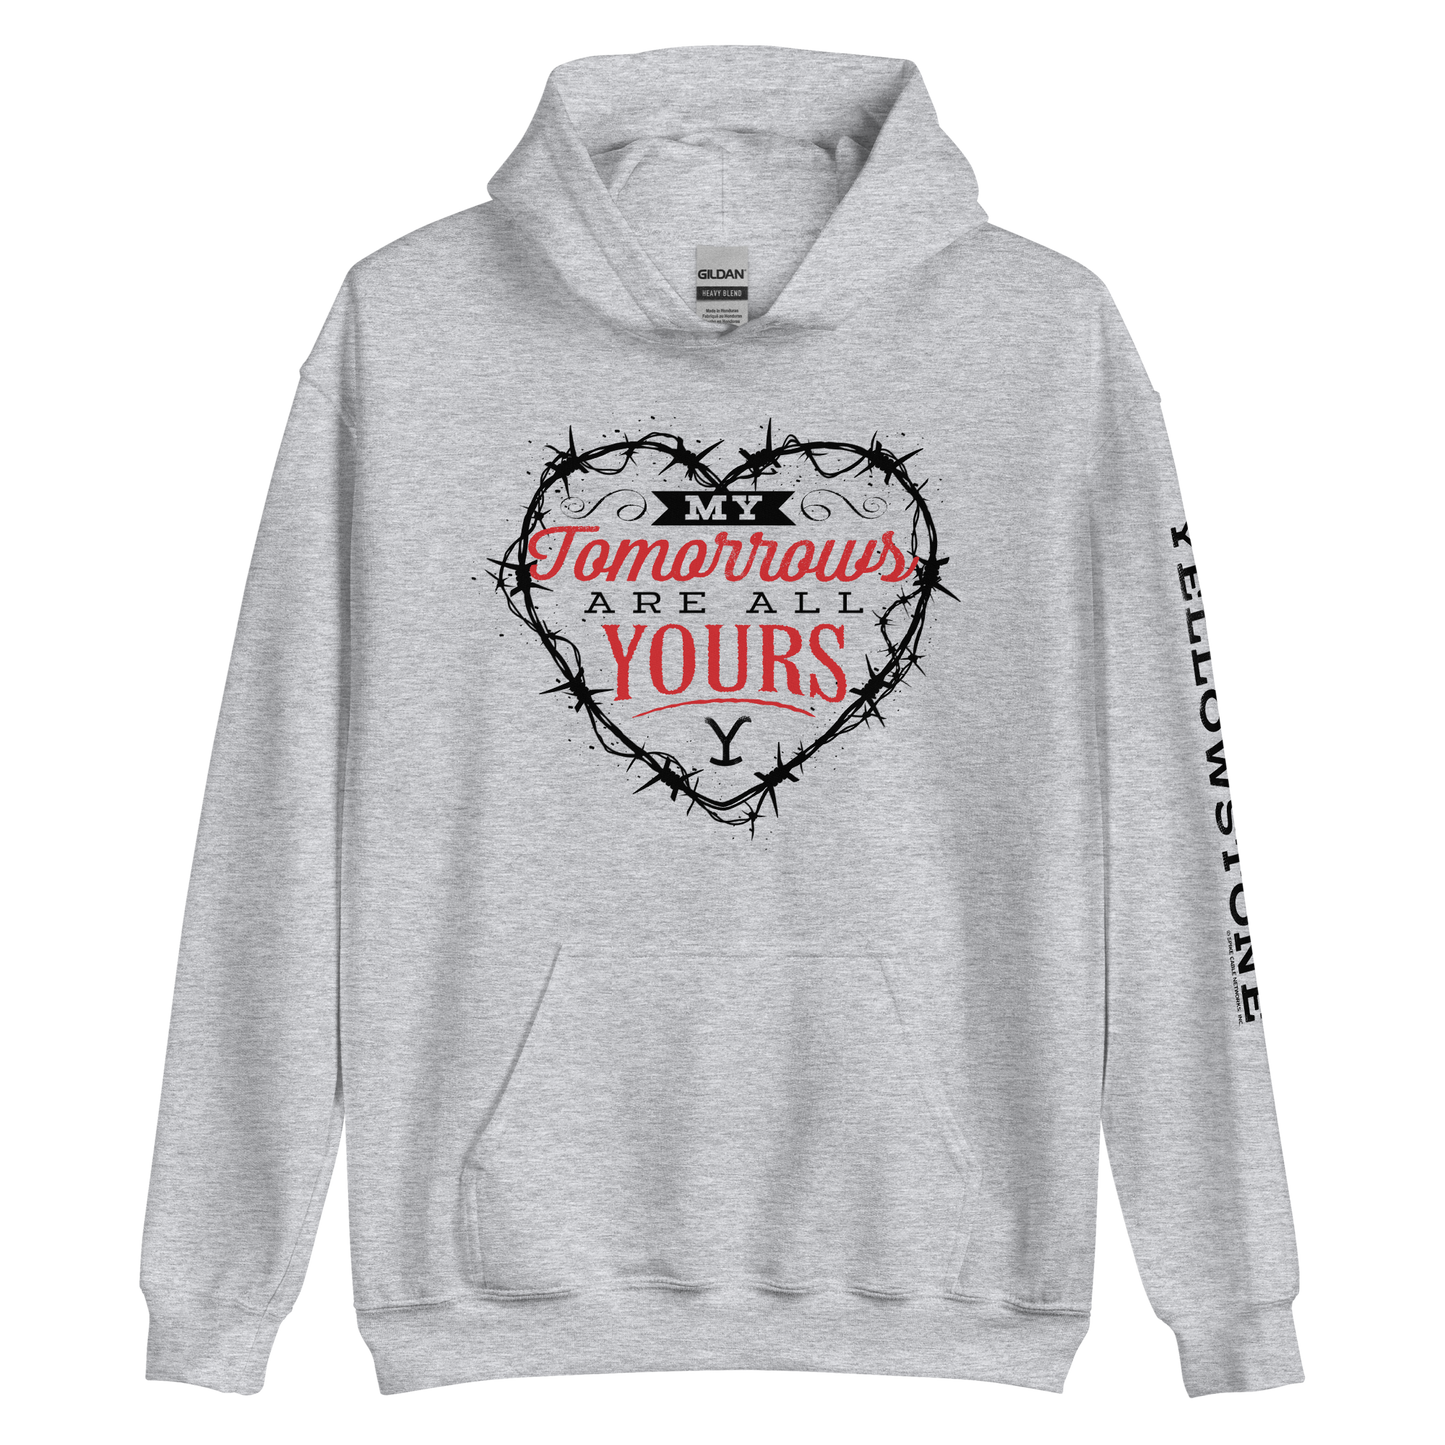 Yellowstone My Tomorrows Are All Yours Sweatshirt à capuche